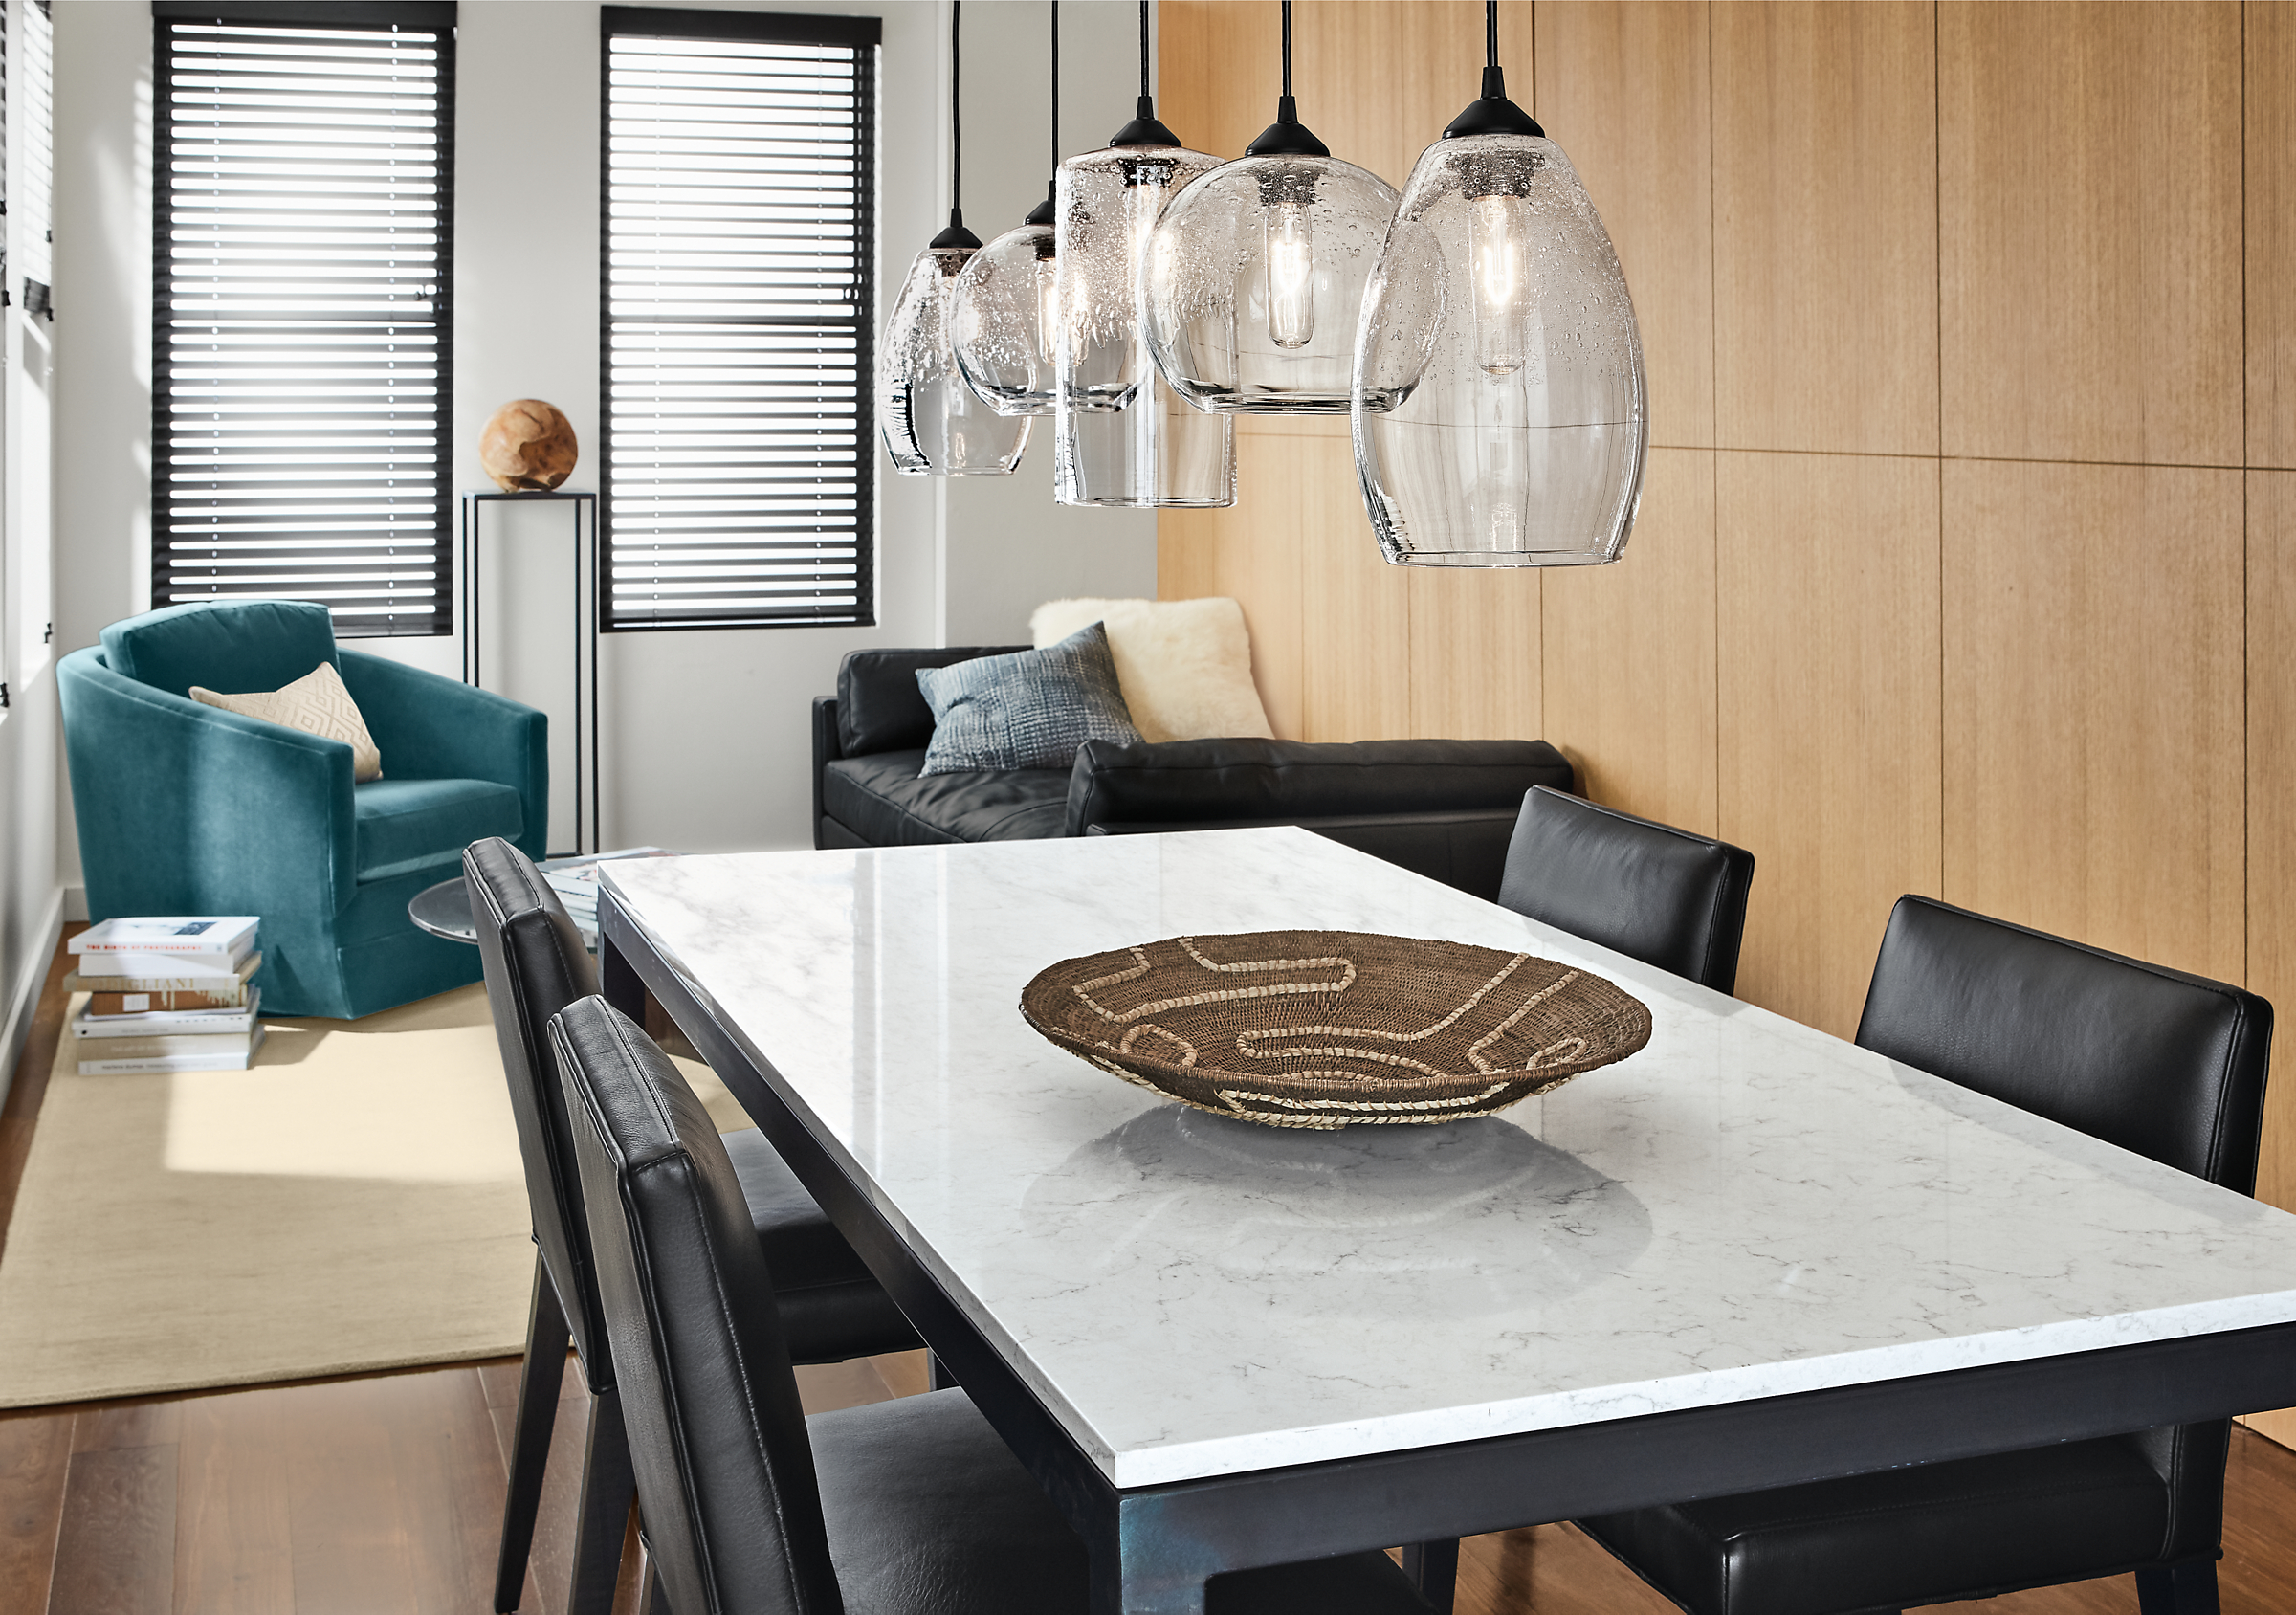 Detail of five Abra glass pendants above a Parsons 72-wide   table with a Marbled White Quartz top.